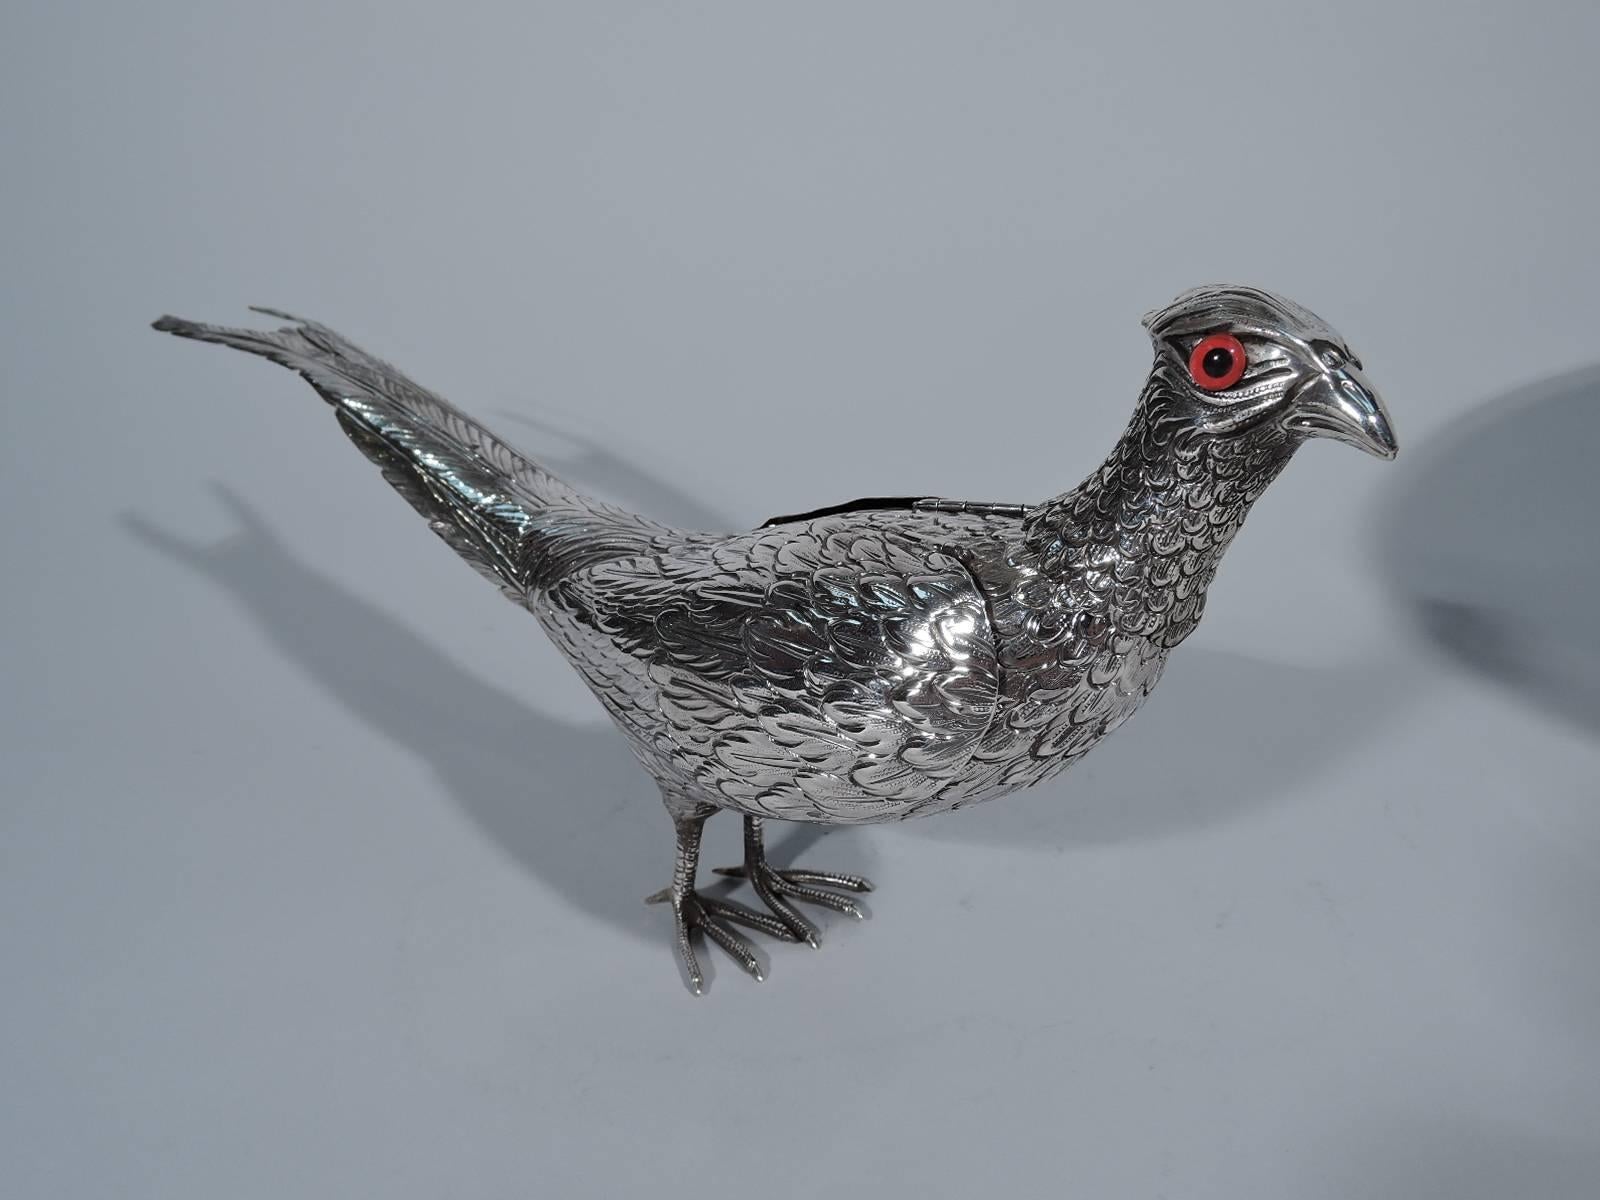 Antique sterling silver pheasant spice box. The bird stands erect with head raised. Well defined plumage and scaly talons. Red glass eyes. Wings hinged. Head detachable. An attractive ornament for a hunt dinner. Hallmarked “sterling.”

Dimensions: